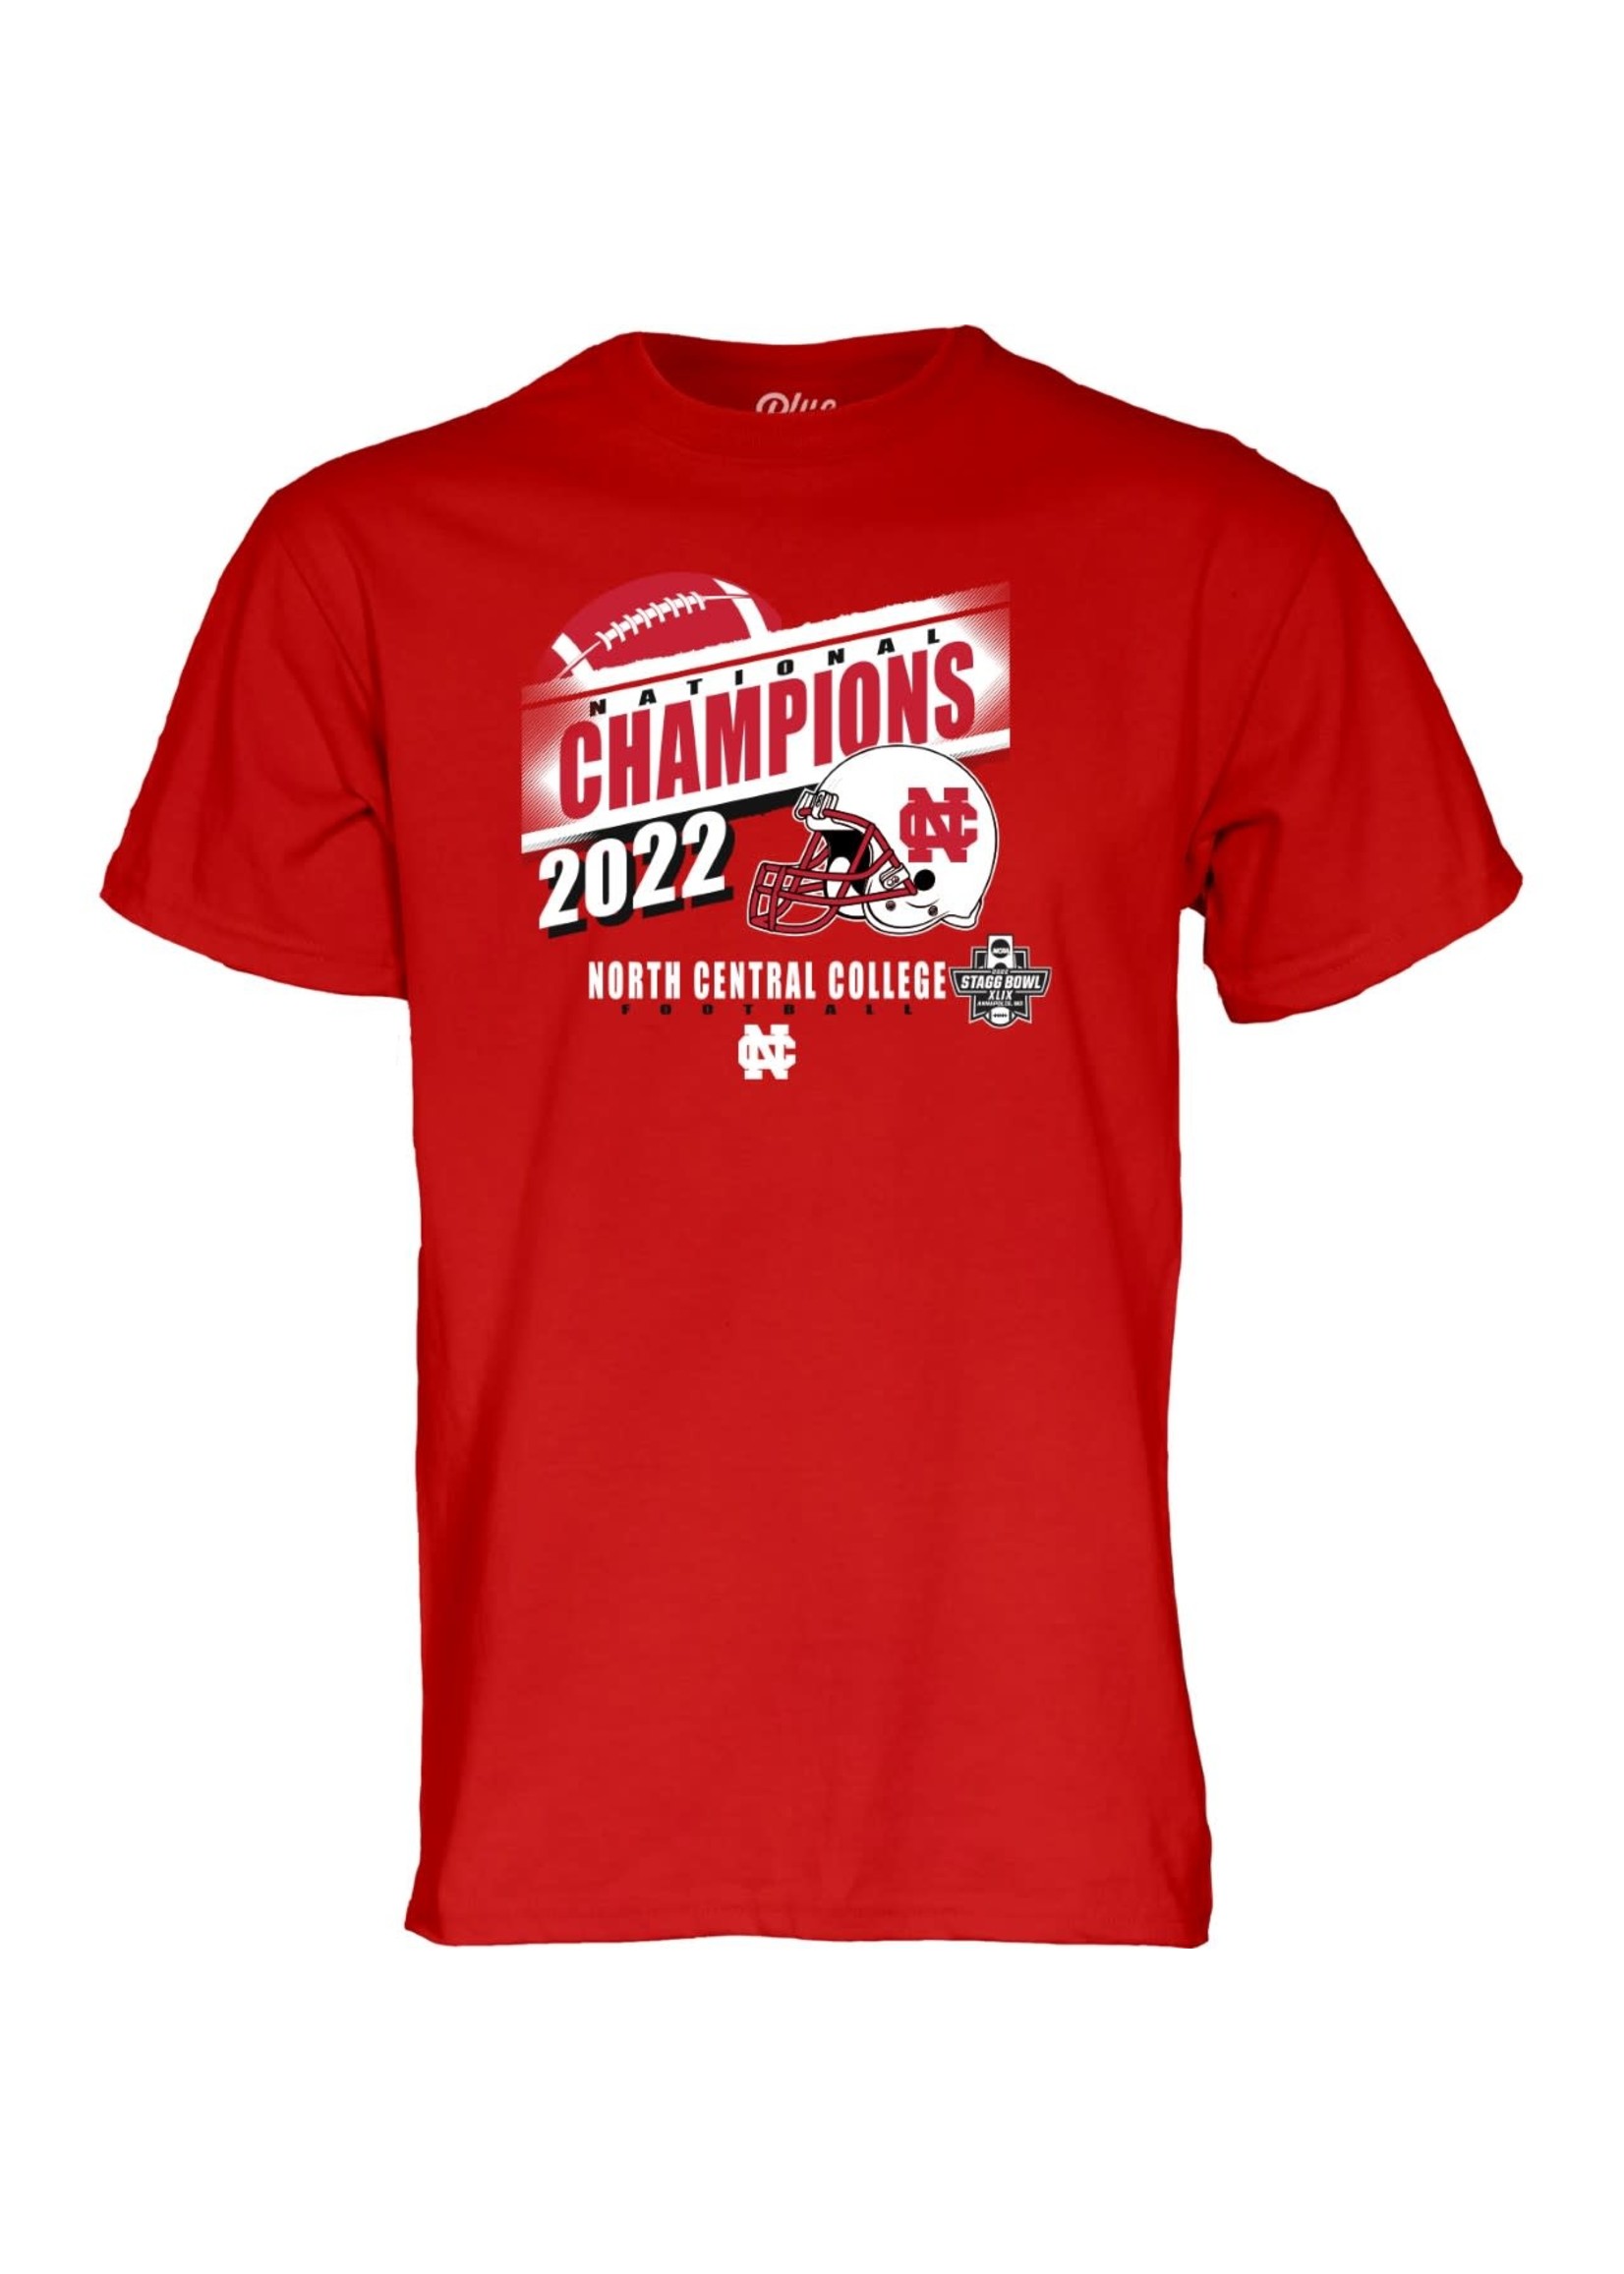 Blue 84 2022 Championship Tee by Blue 84